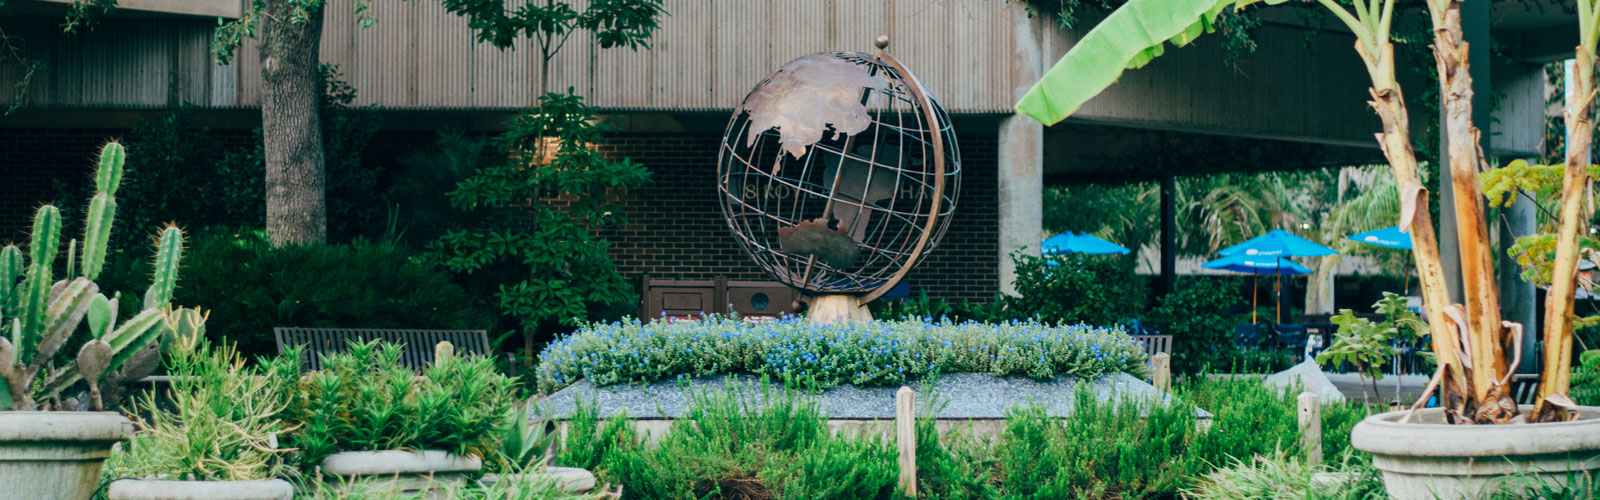 globe in middle of greenery